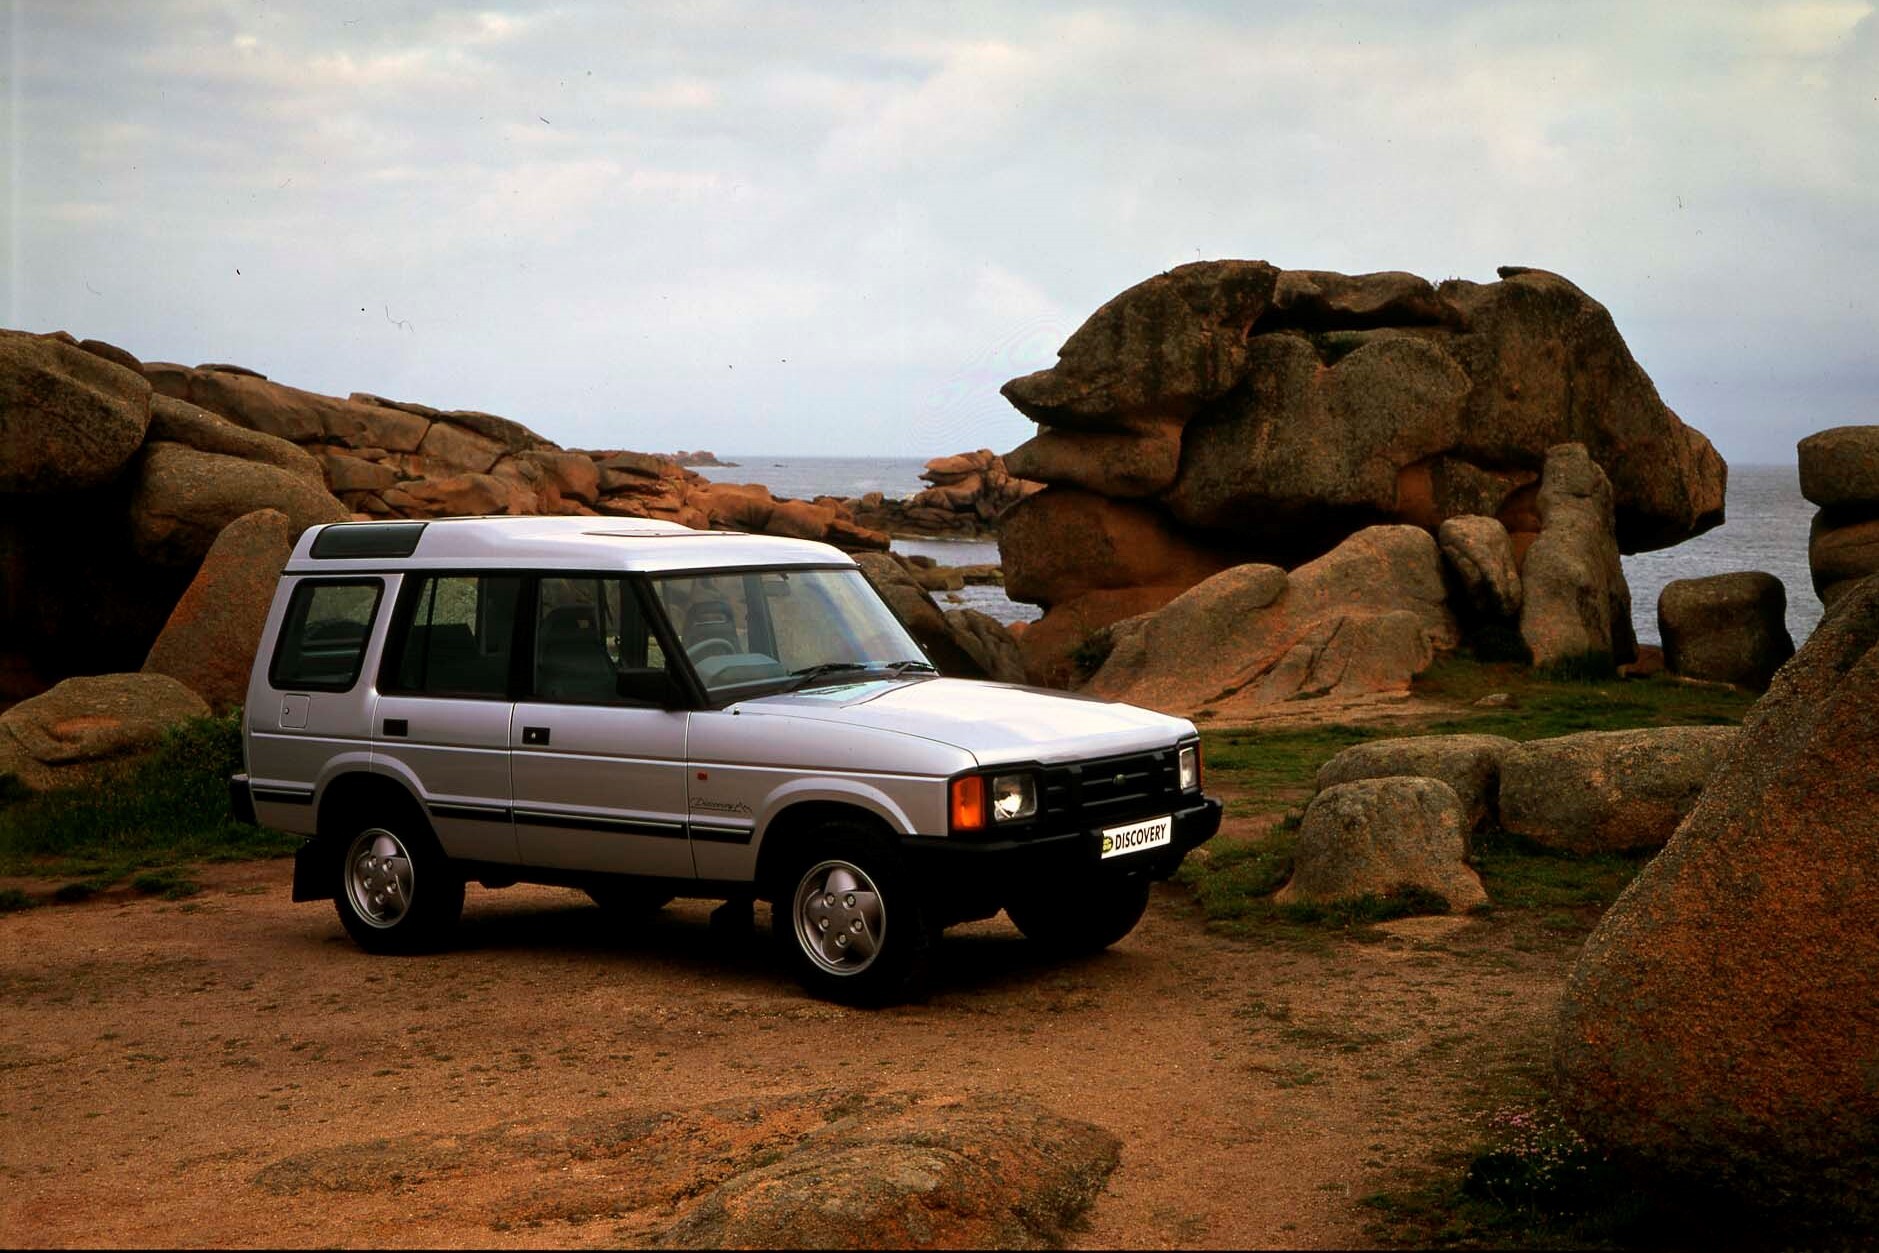 First discovery. Дискавери 1 поколение. Land Rover Discovery 1. Ленд Ровер Дискавери 1 поколения 7 мест. Дискавери 1 96 года.